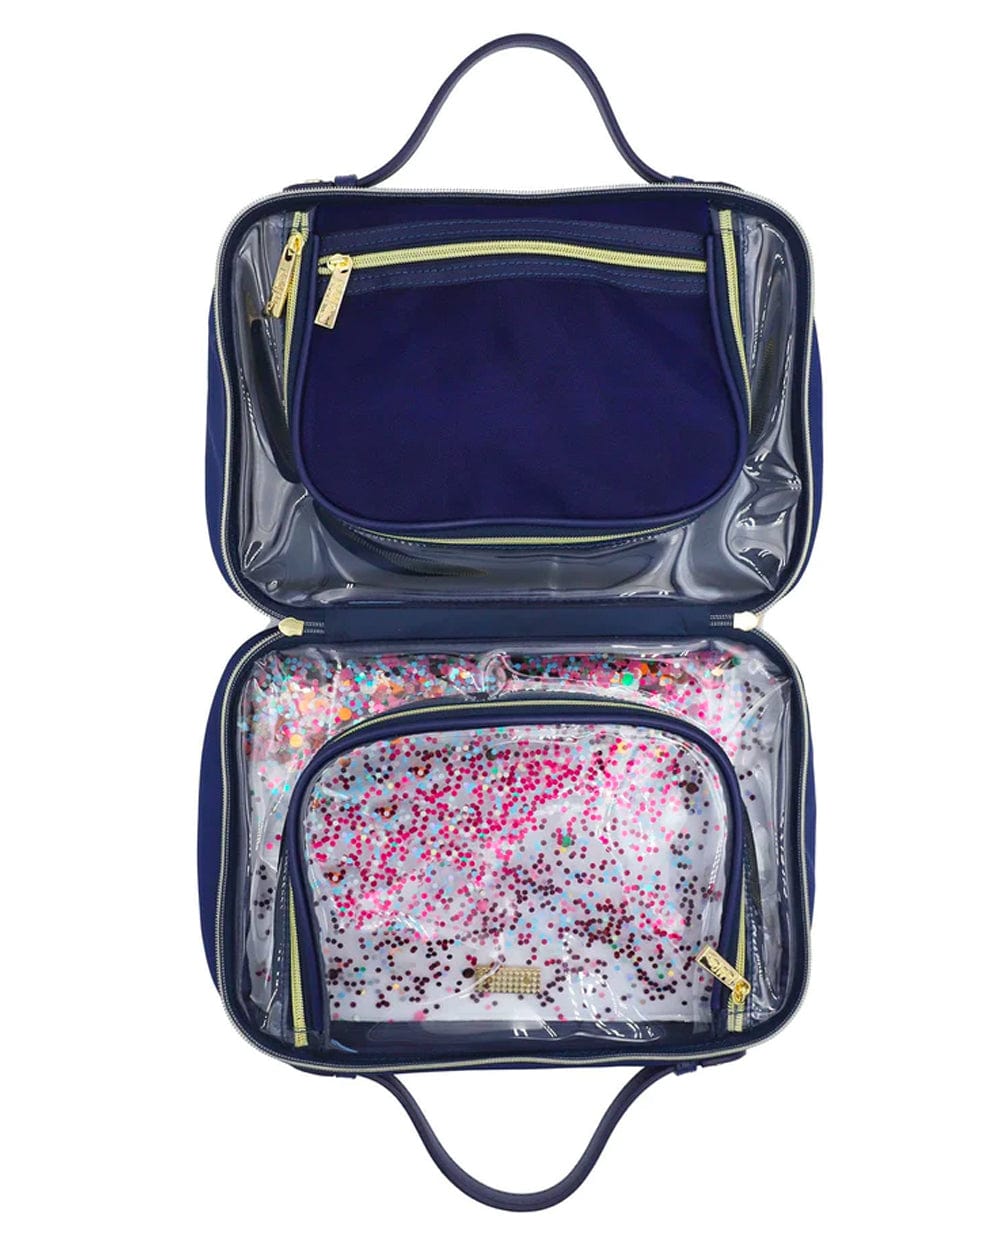 Essentials Confetti Ultimate Travel Bundle with Clear Tote, Pouch